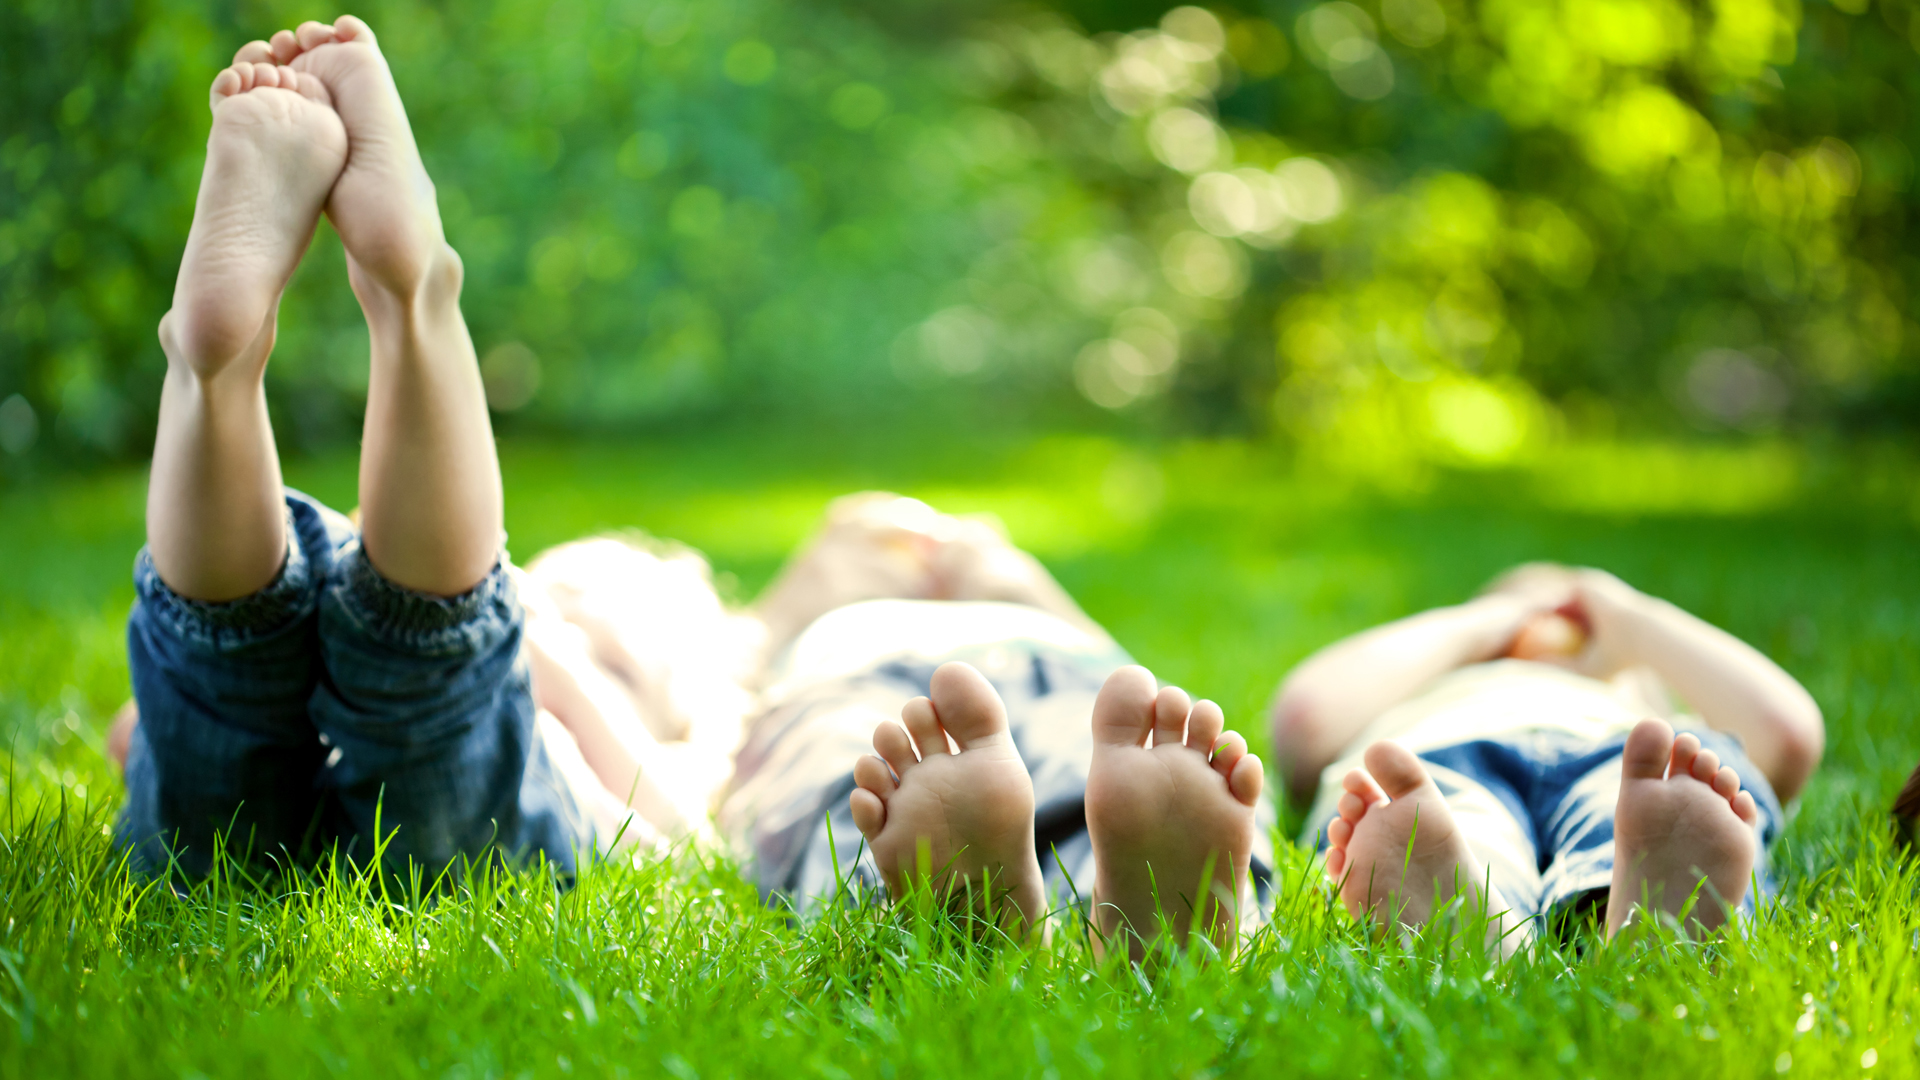 Group of happy children lying on green grass outdoors in spring park.